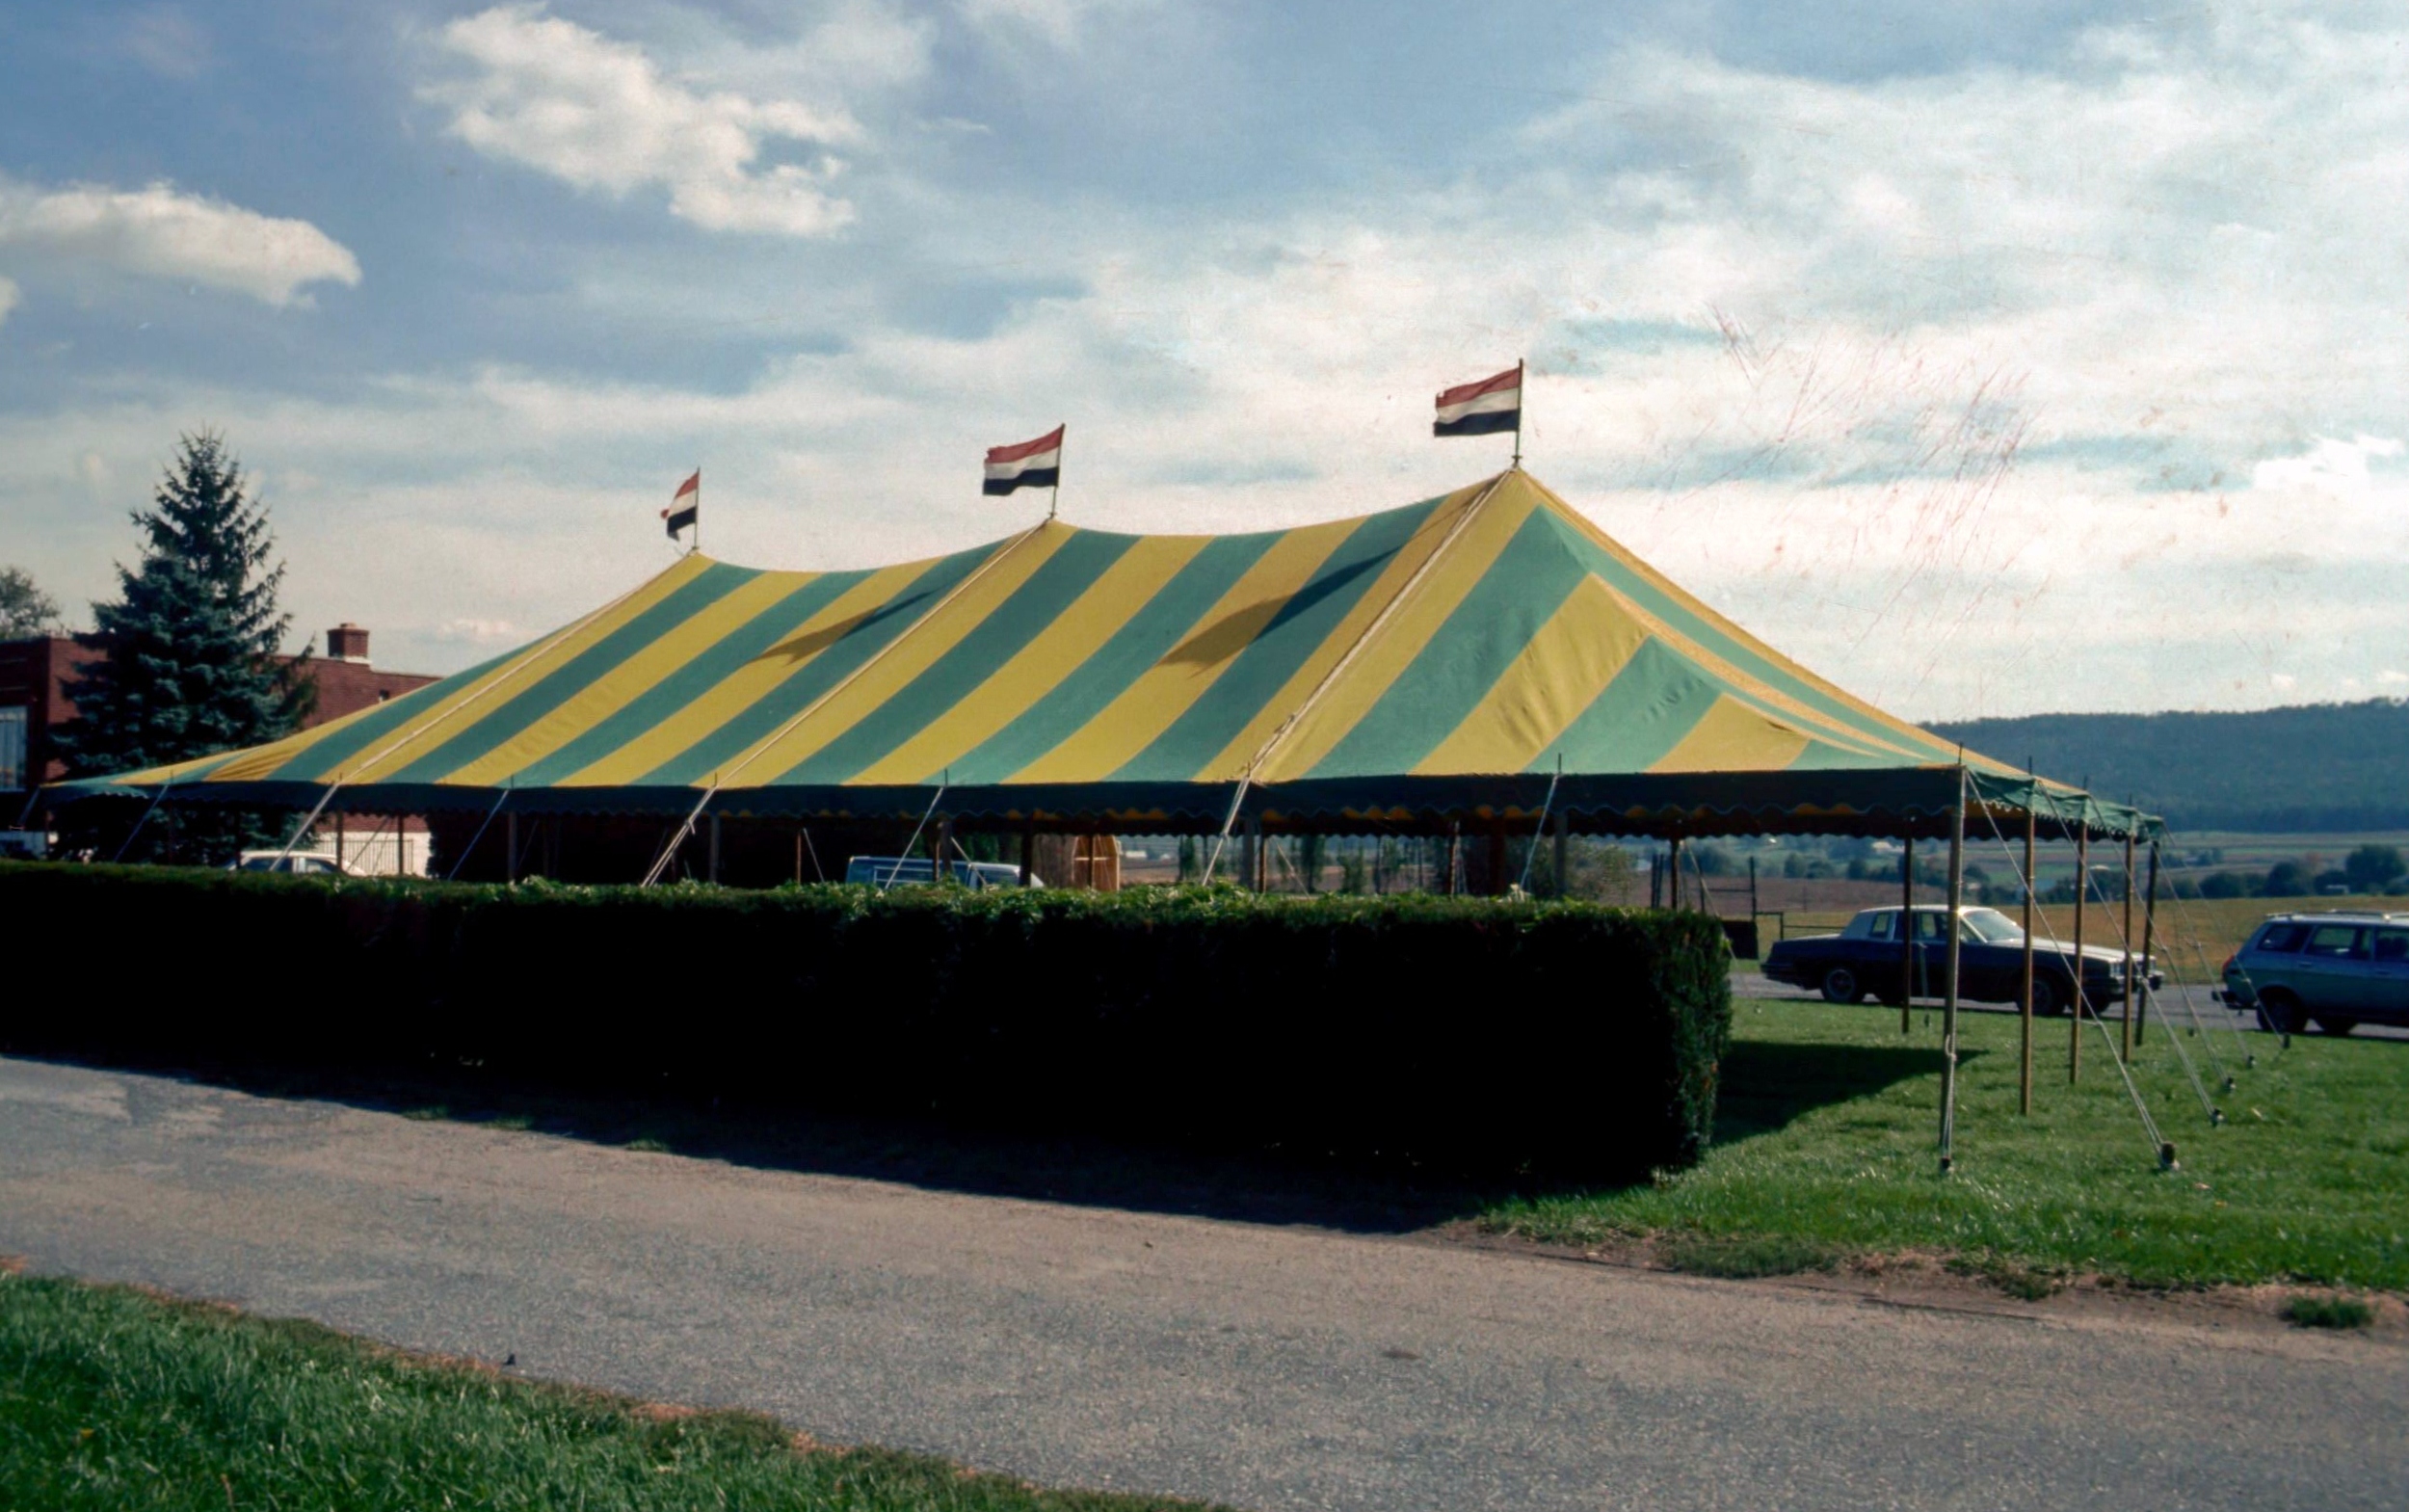  After gray and green tents, we bought green and yellow striped tents. 